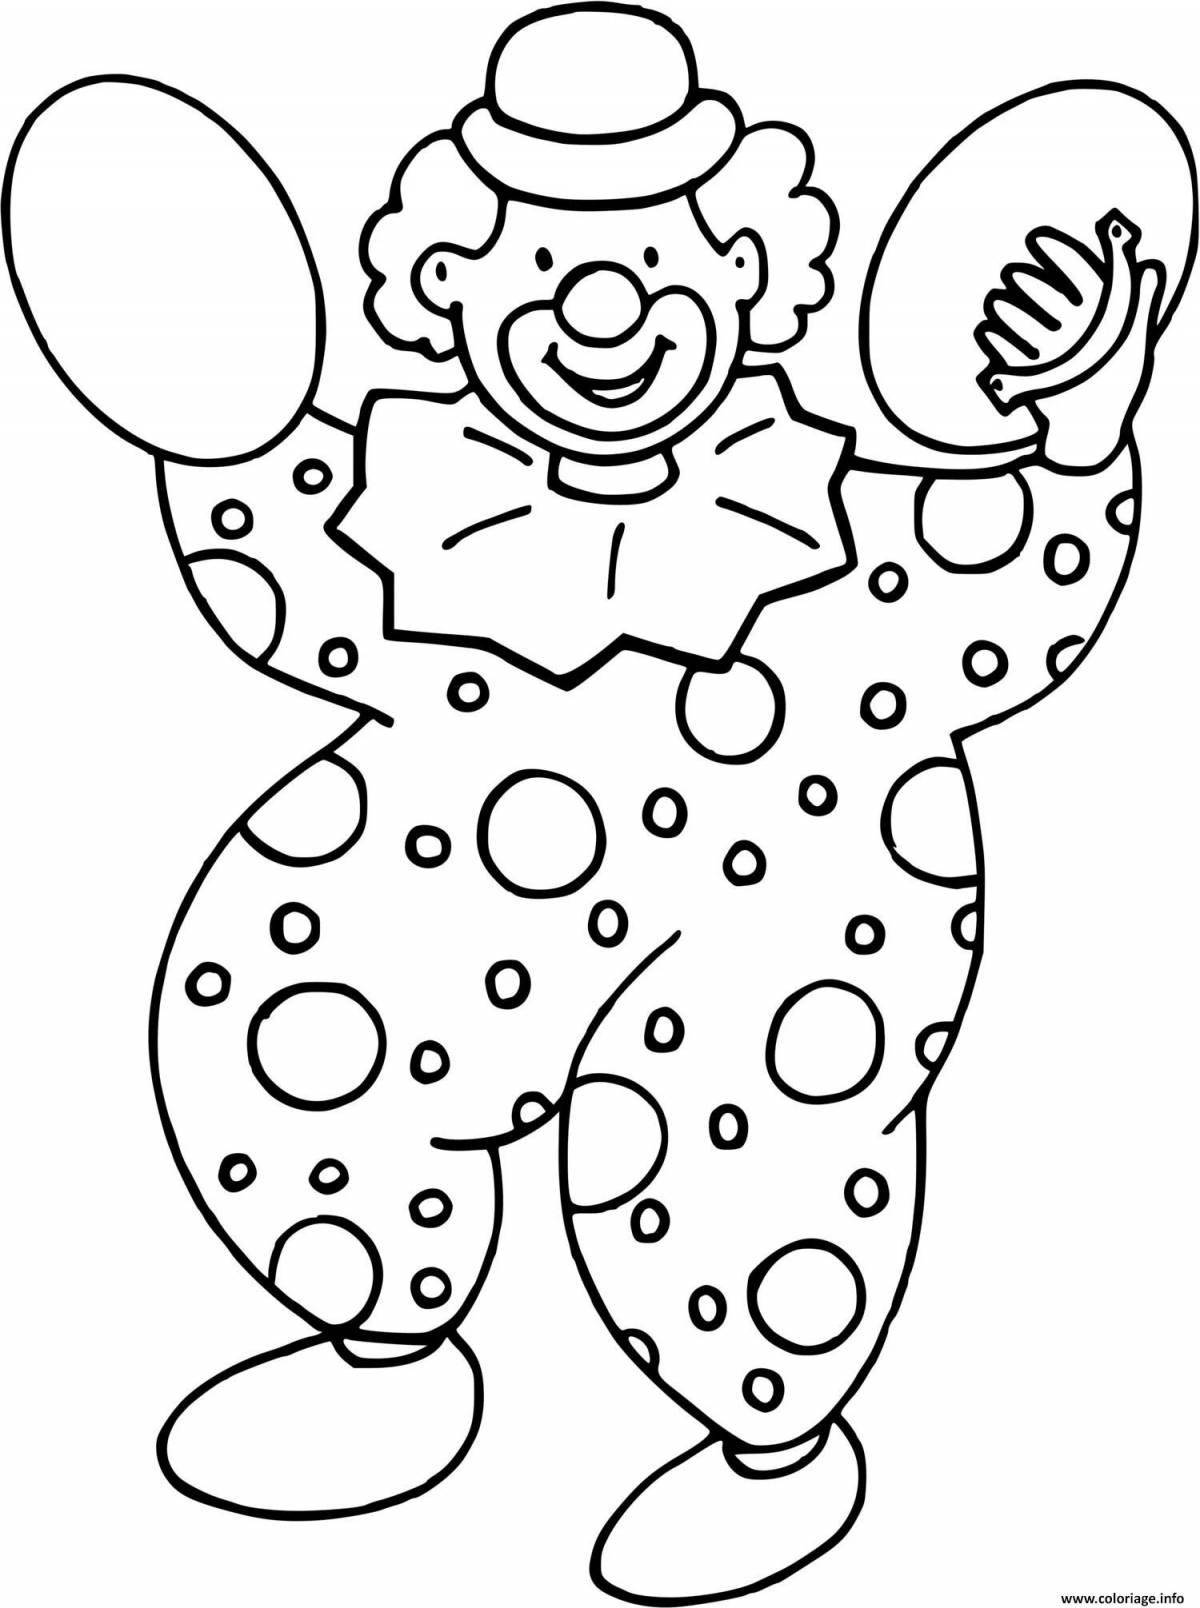 Humorous coloring book of jesters for children